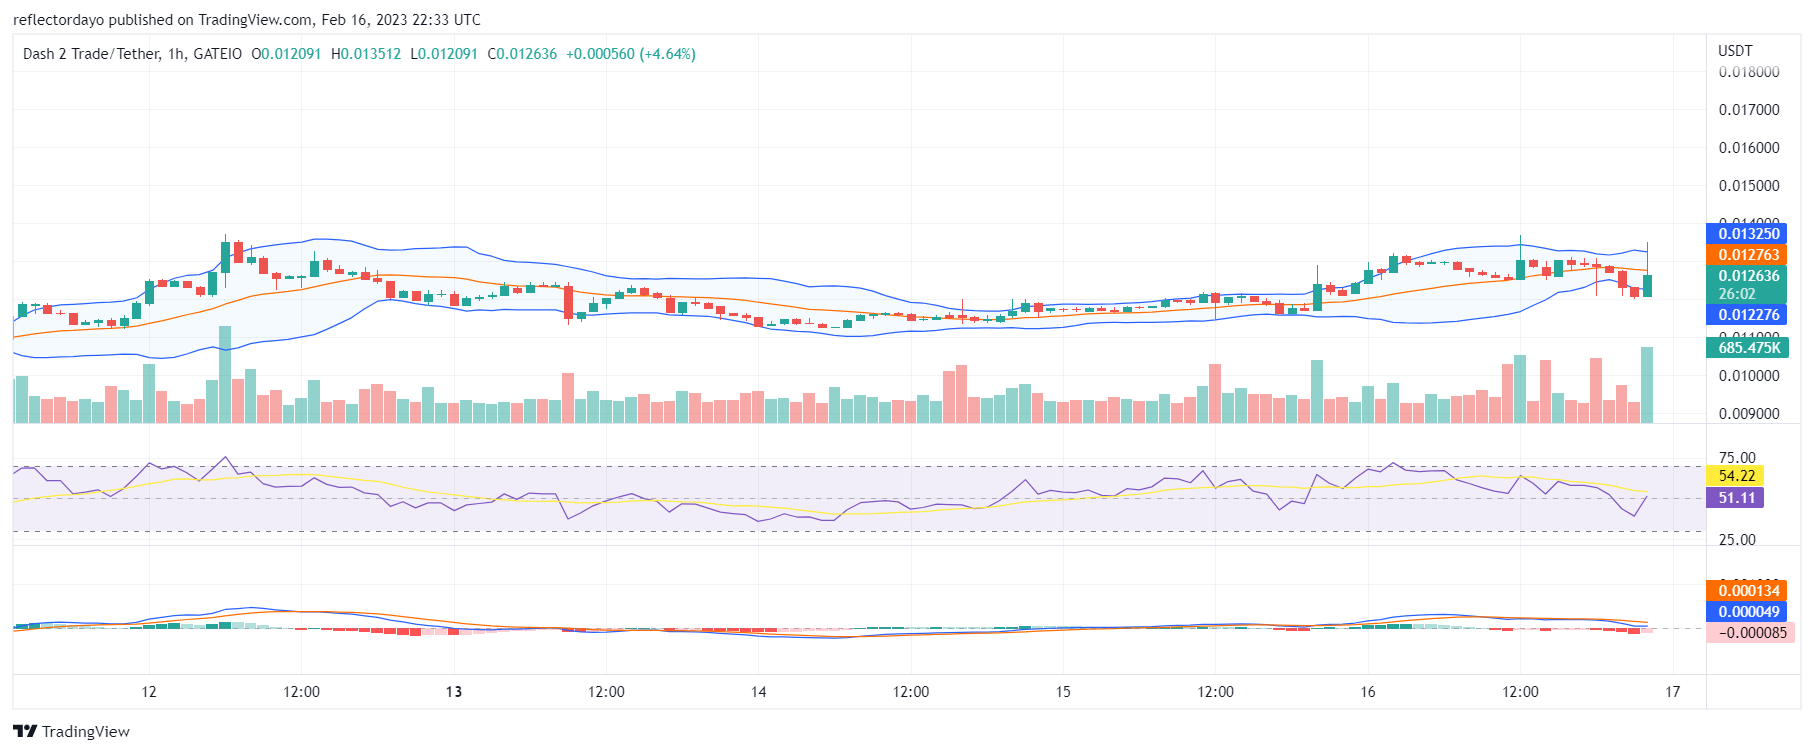 Fresh Strong Support for Dash 2 Trade (D2T) at $0.0125